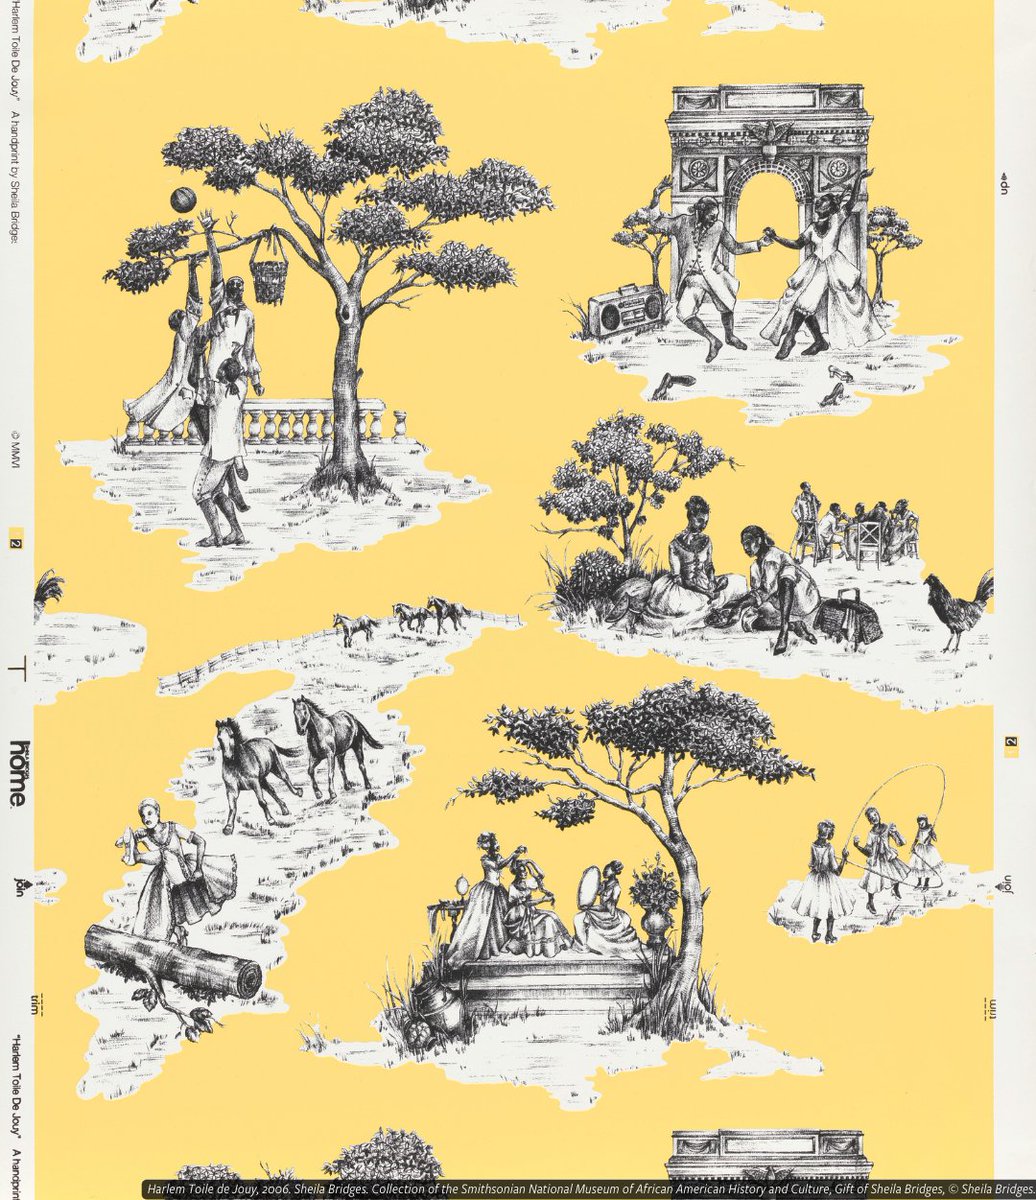 “I created Harlem Toile to lampoon some of the stereotypes commonly associated with African Americans, but ultimately to celebrate our complex history and rich culture, which has often been appropriated.” — Sheila Bridges